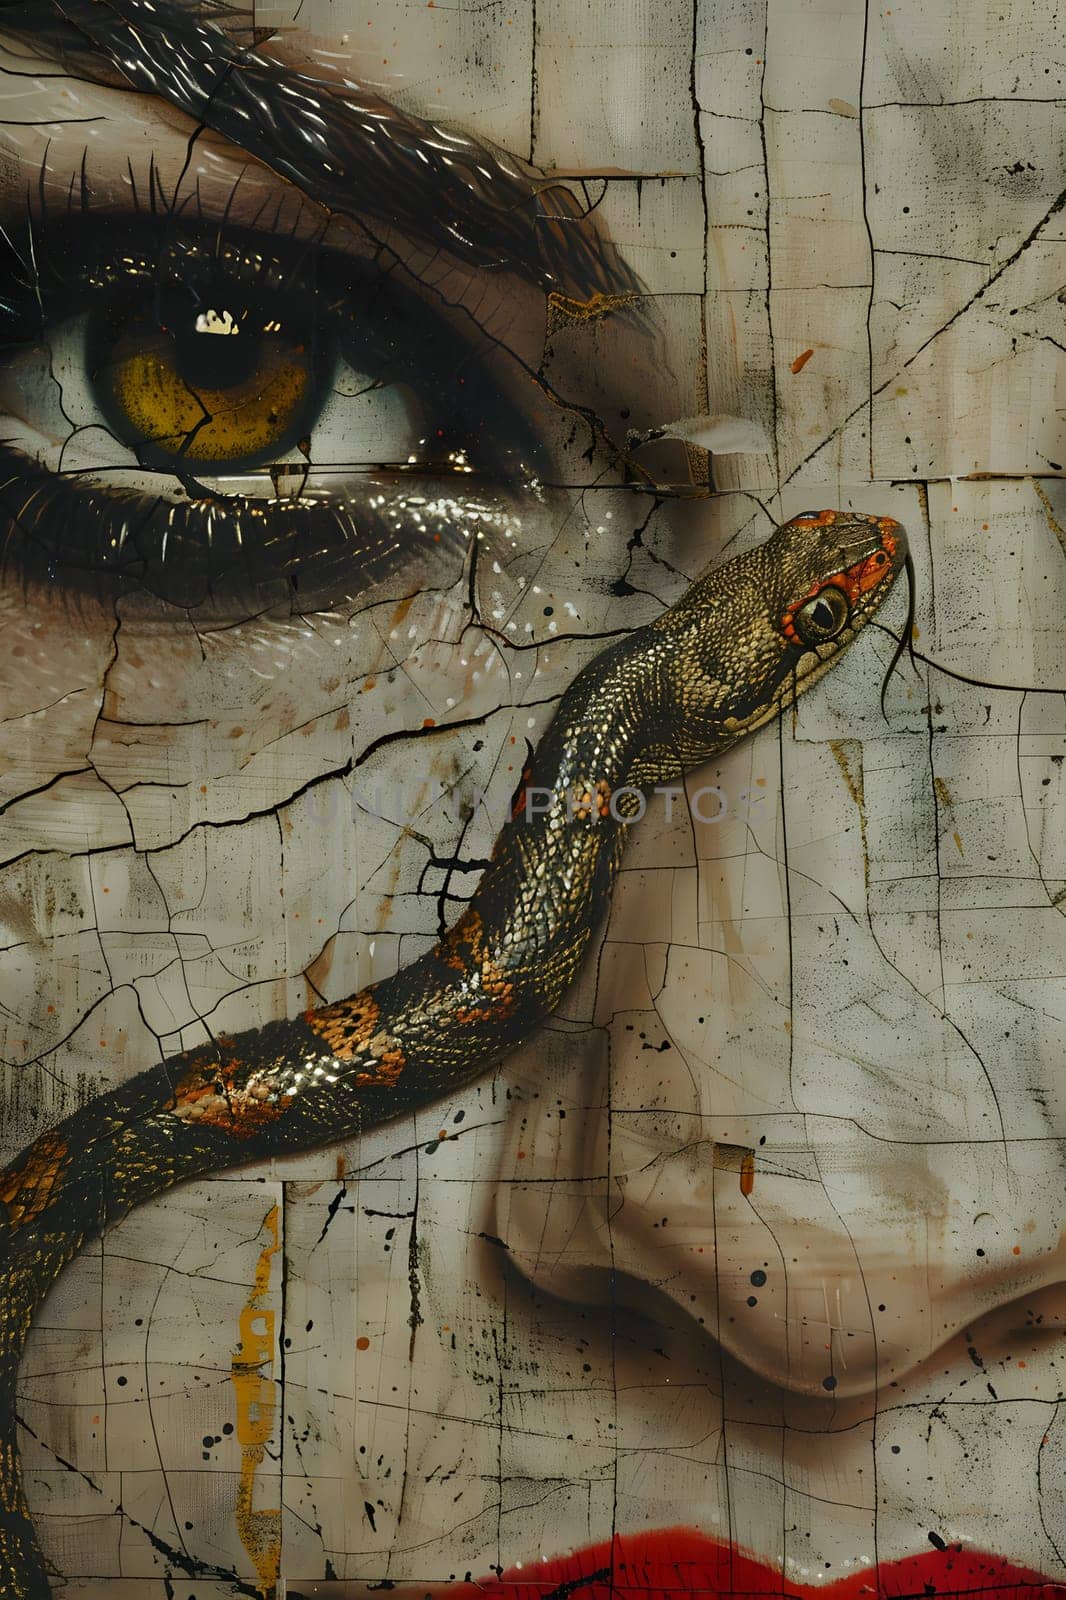 A stunning visual arts piece depicting a woman with a serpent in her mouth, beautifully created with eyelash brushes on wood, a unique illustration